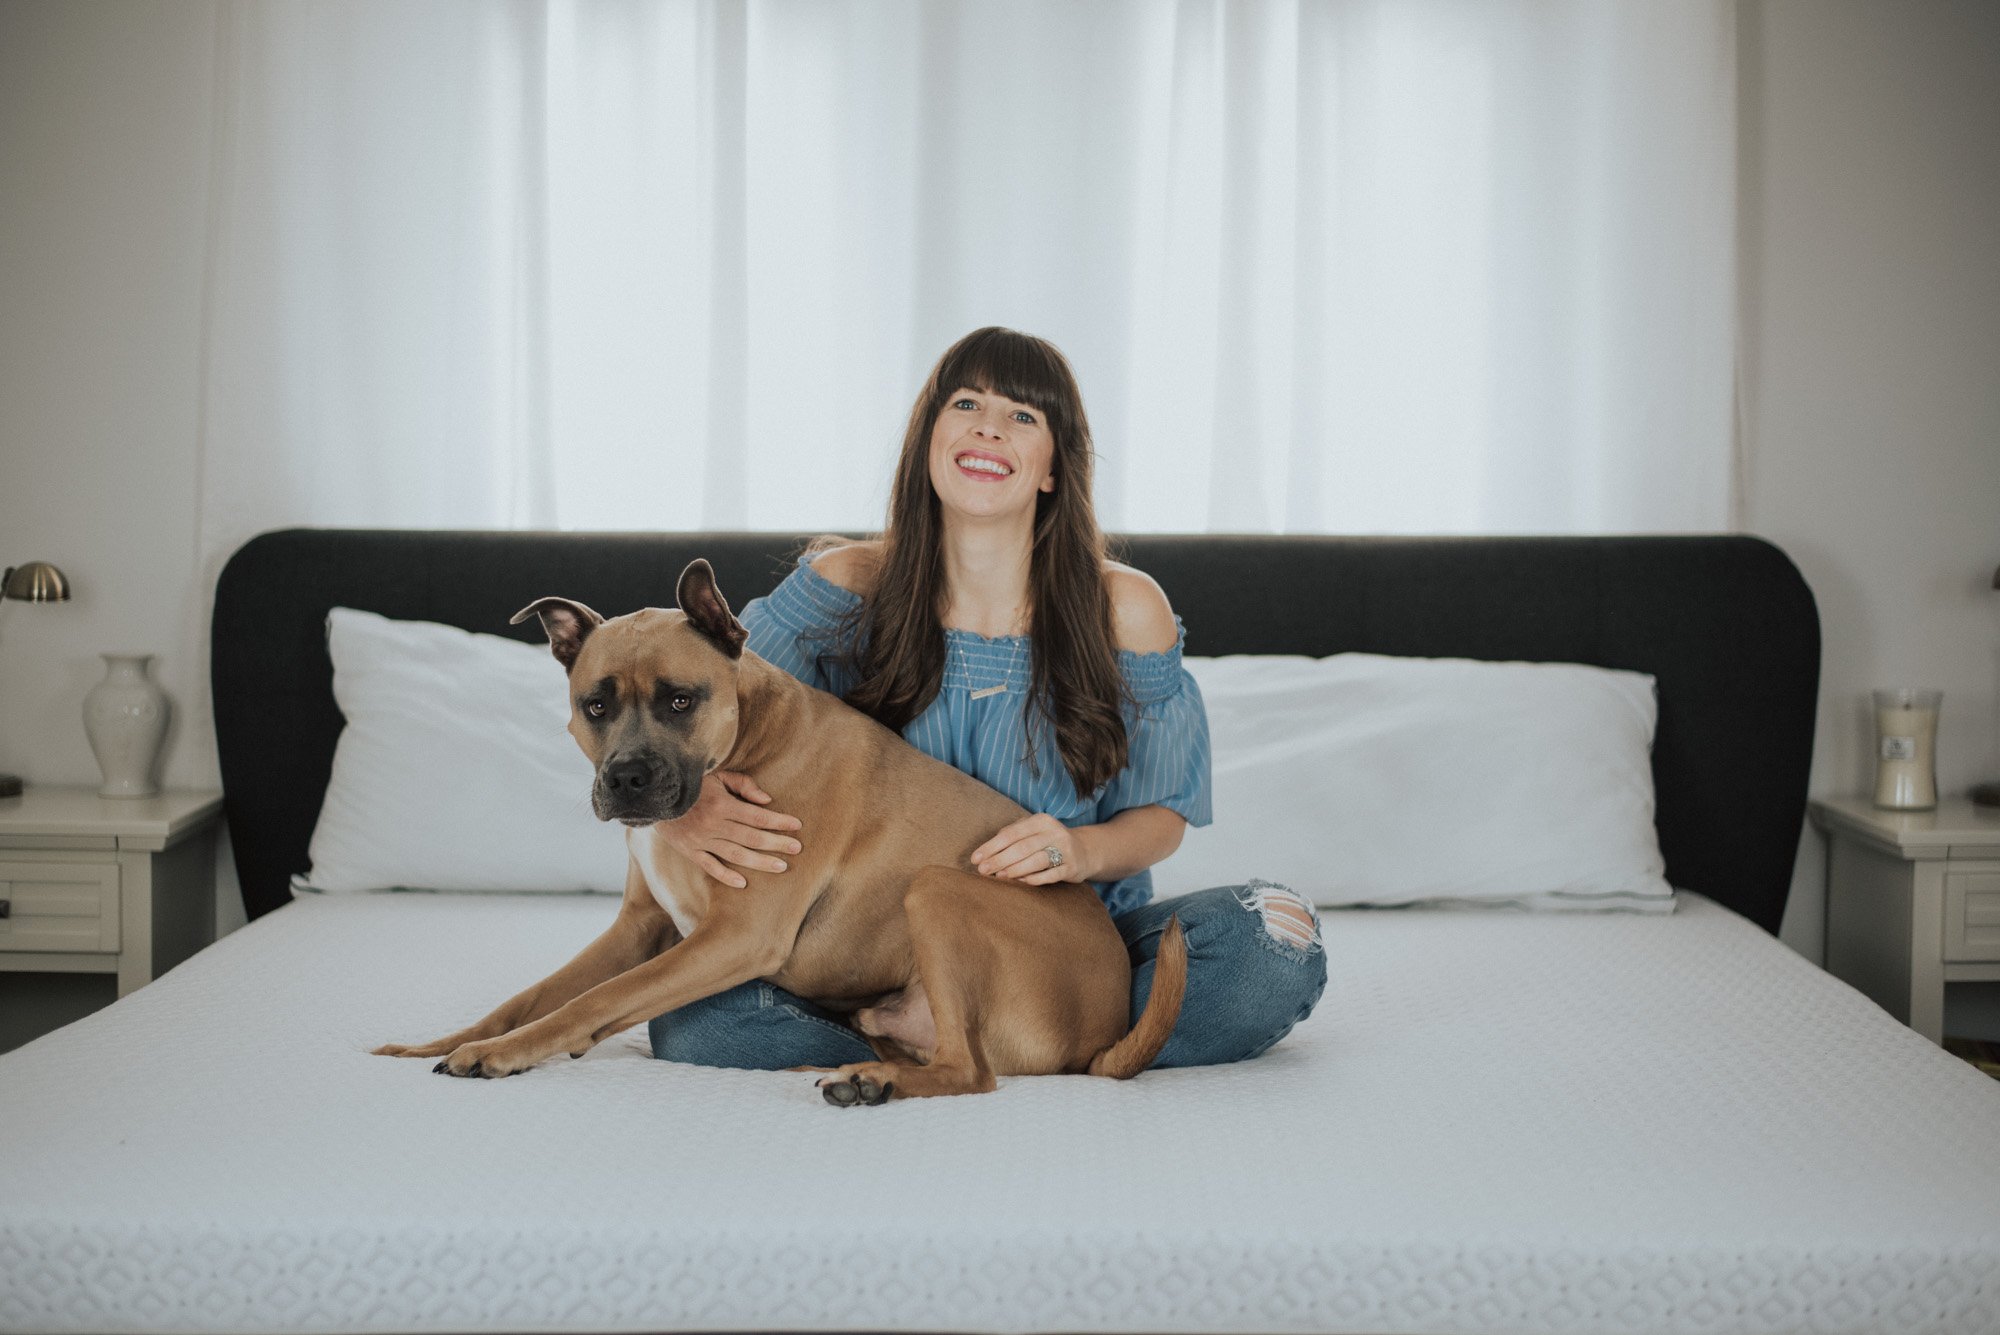 Wild Rosebuds | An Initial Review of the Endy Mattress